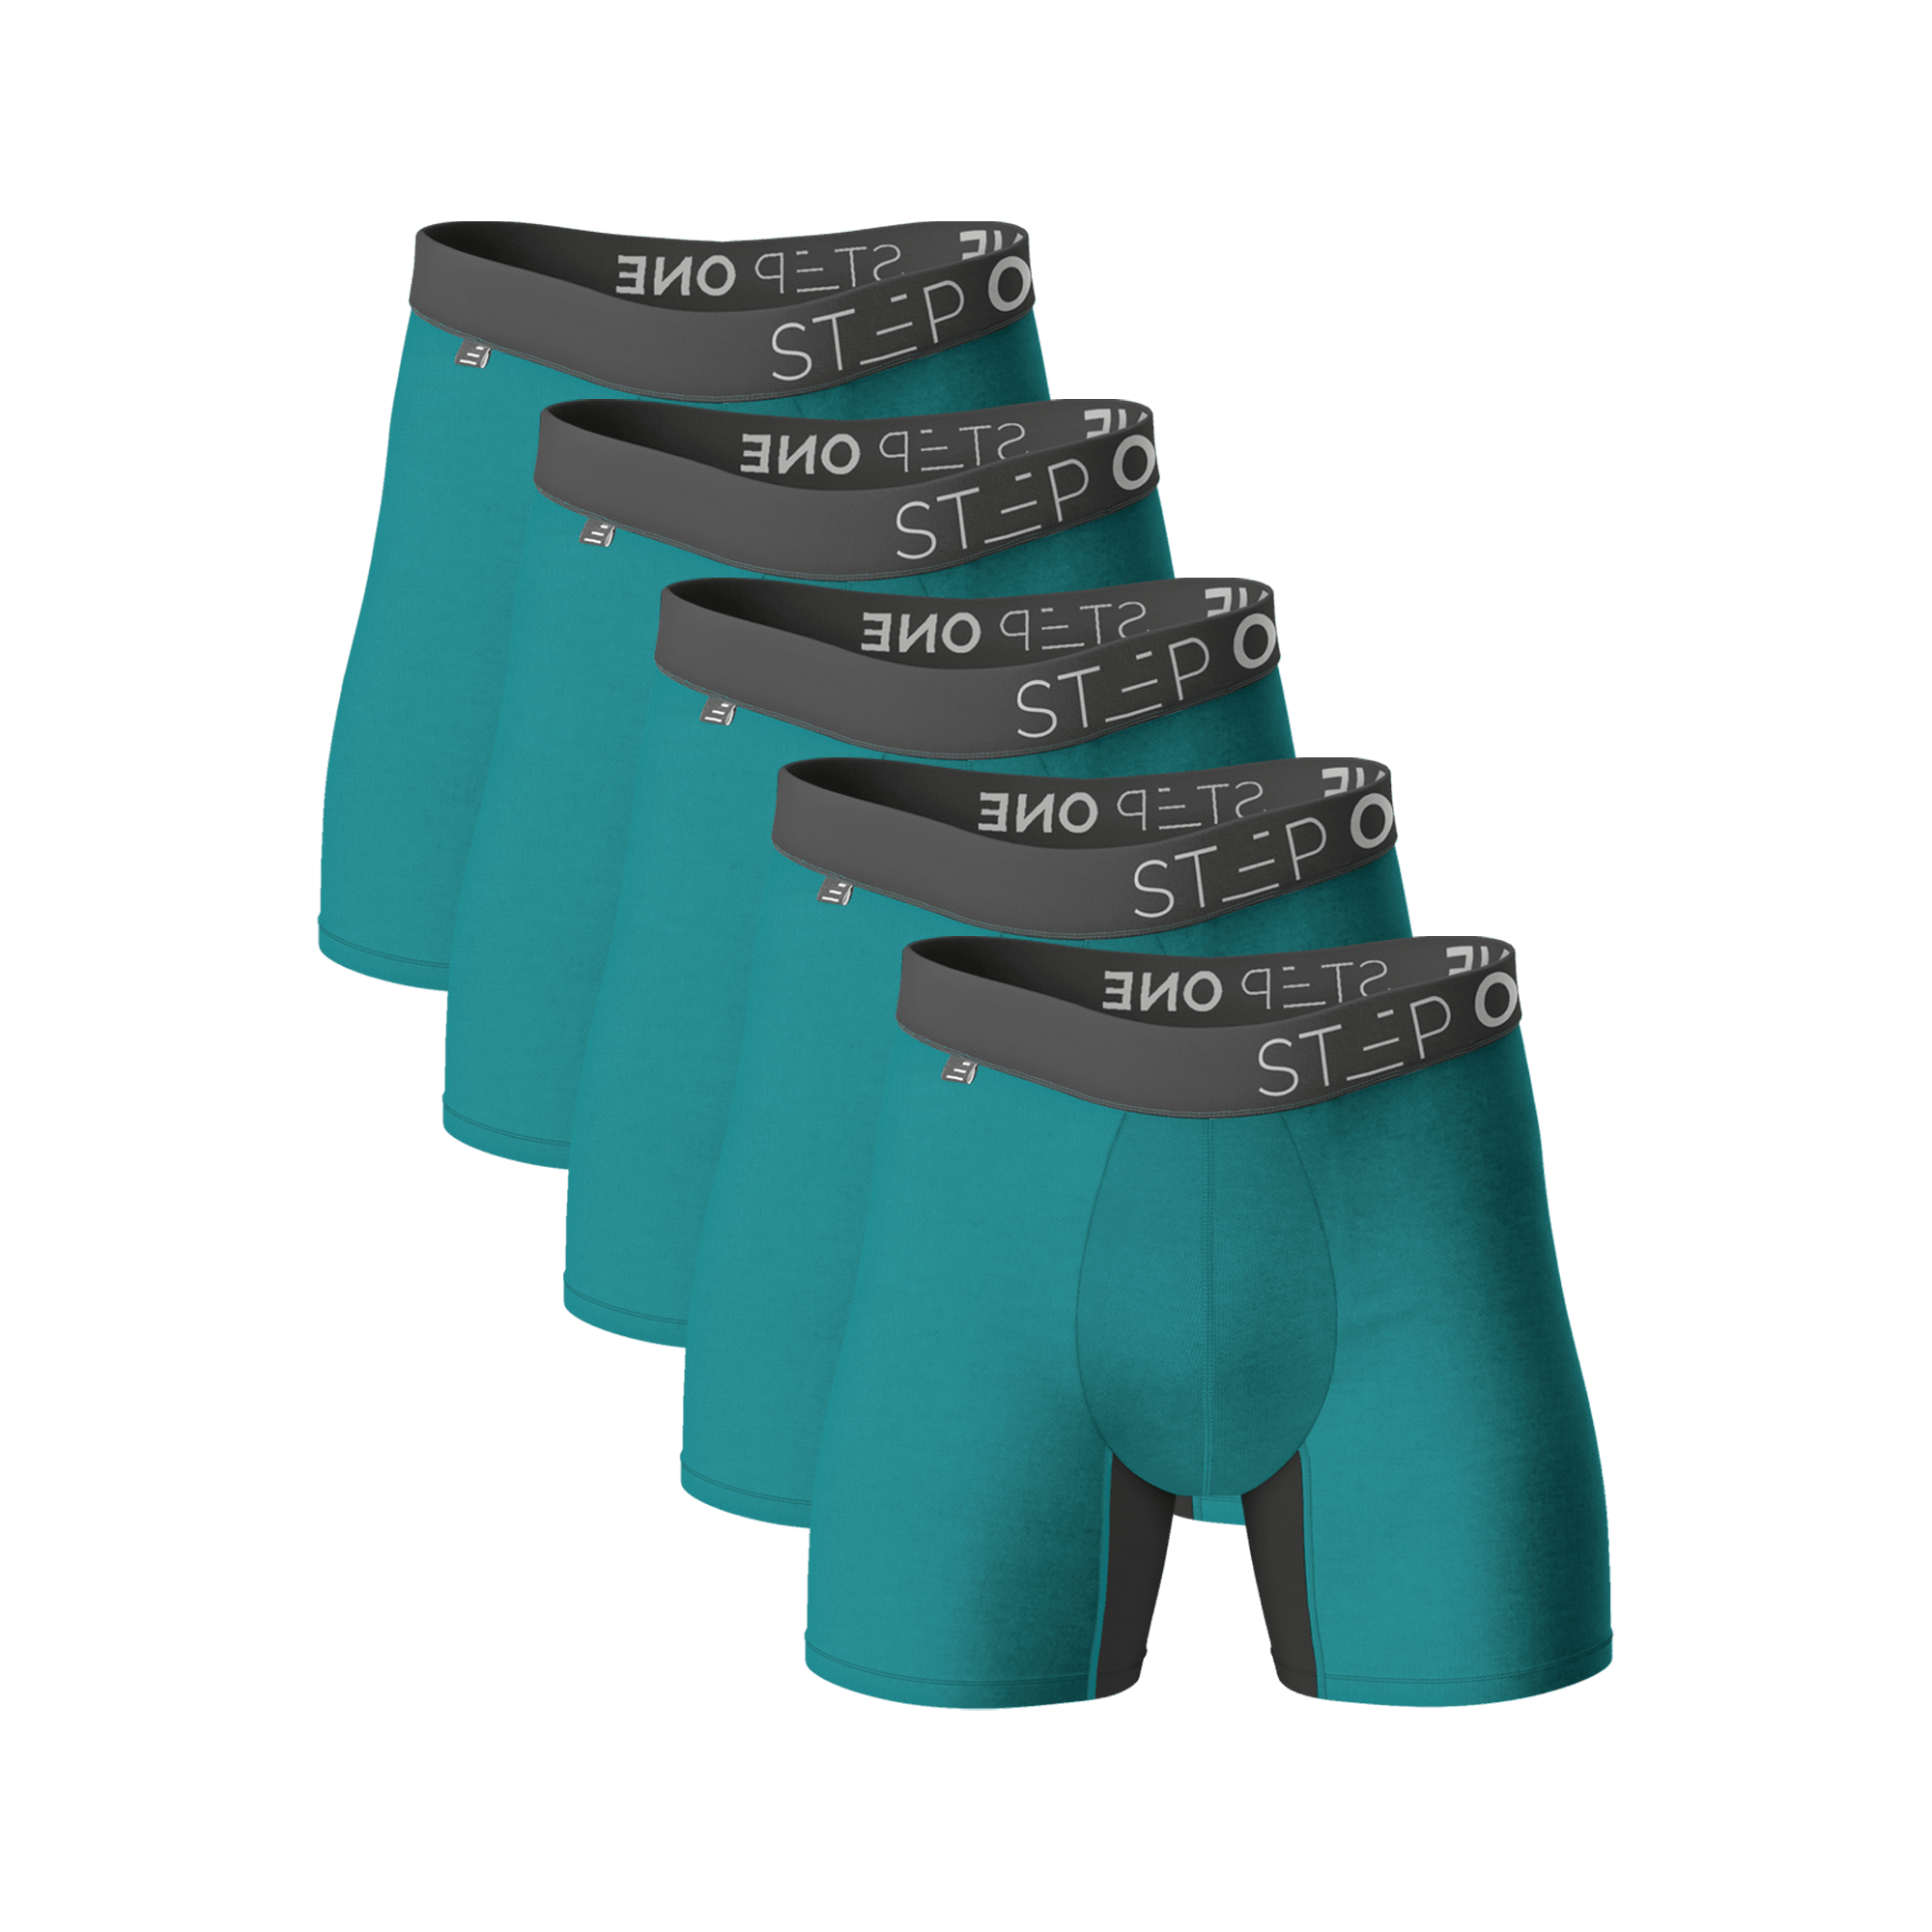 Boxer Brief - 5 Pack - Smashed Avo